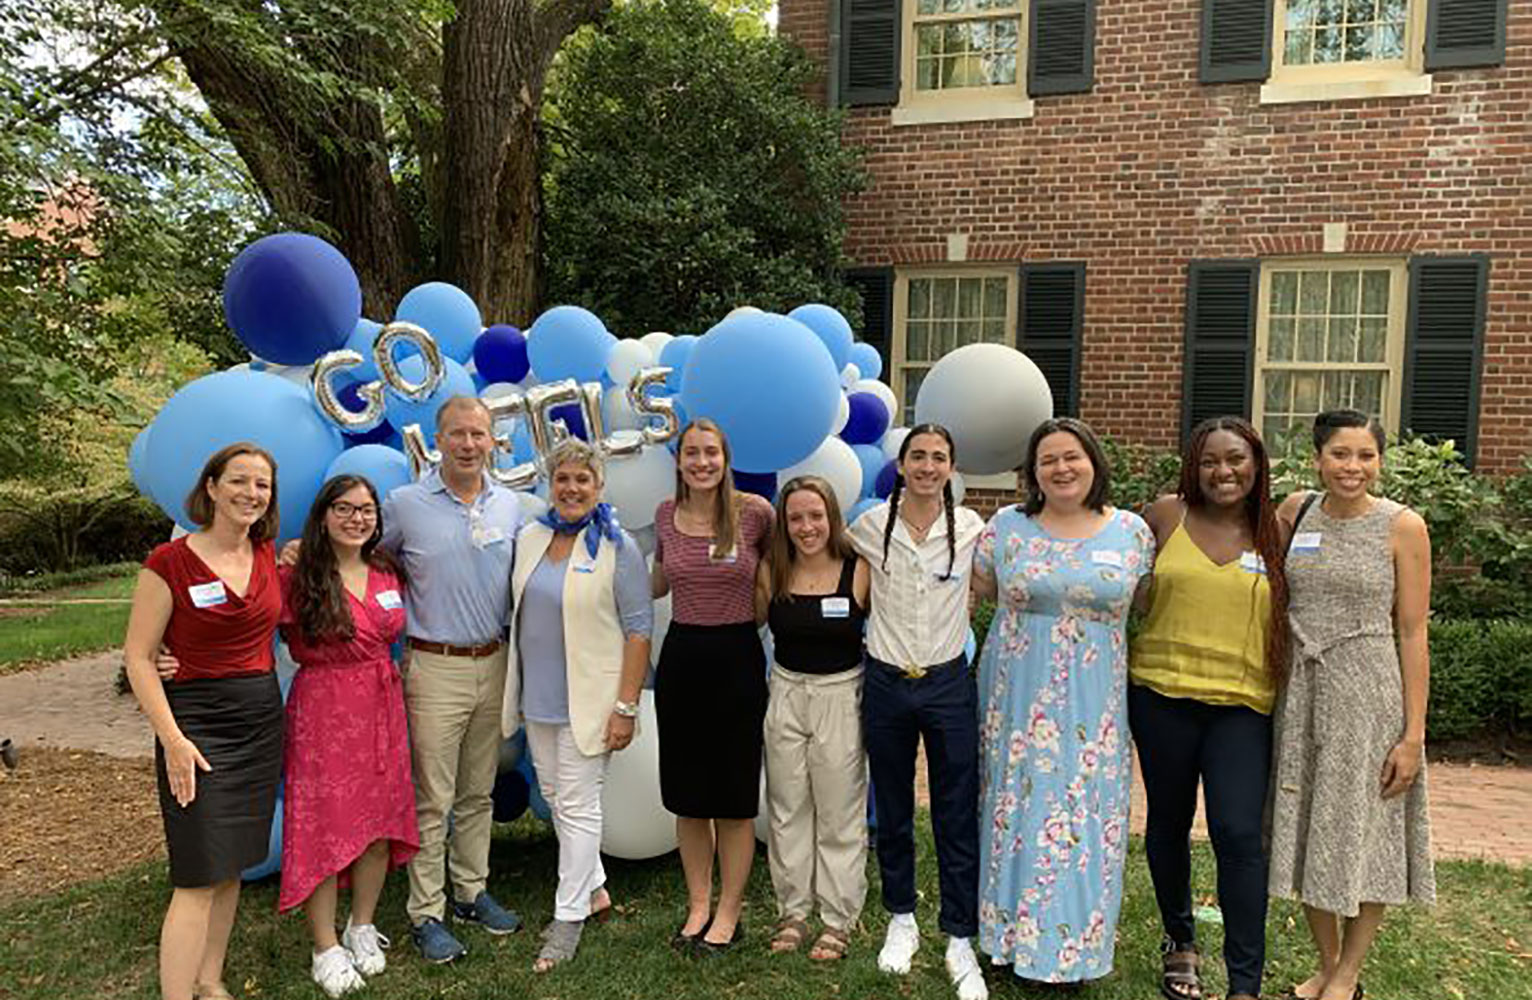 Doug Mackenzie and Dean Terry Rhodes (third and fourth from left) spent time with students at a fellowship gathering in fall 2020.